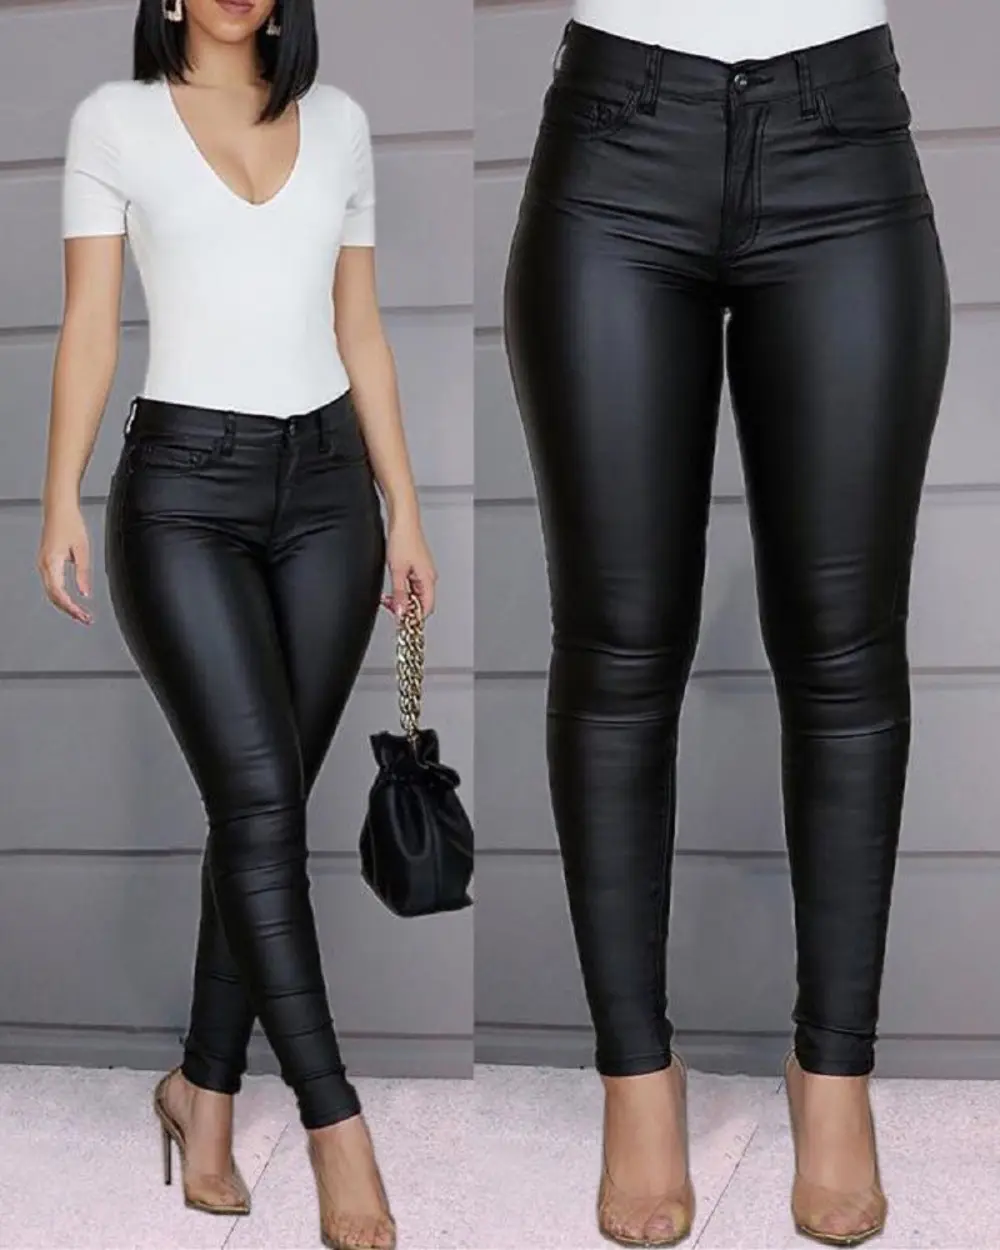 Solid Color PU Leather Pants Casual Sexy Leggings Women's Trousers